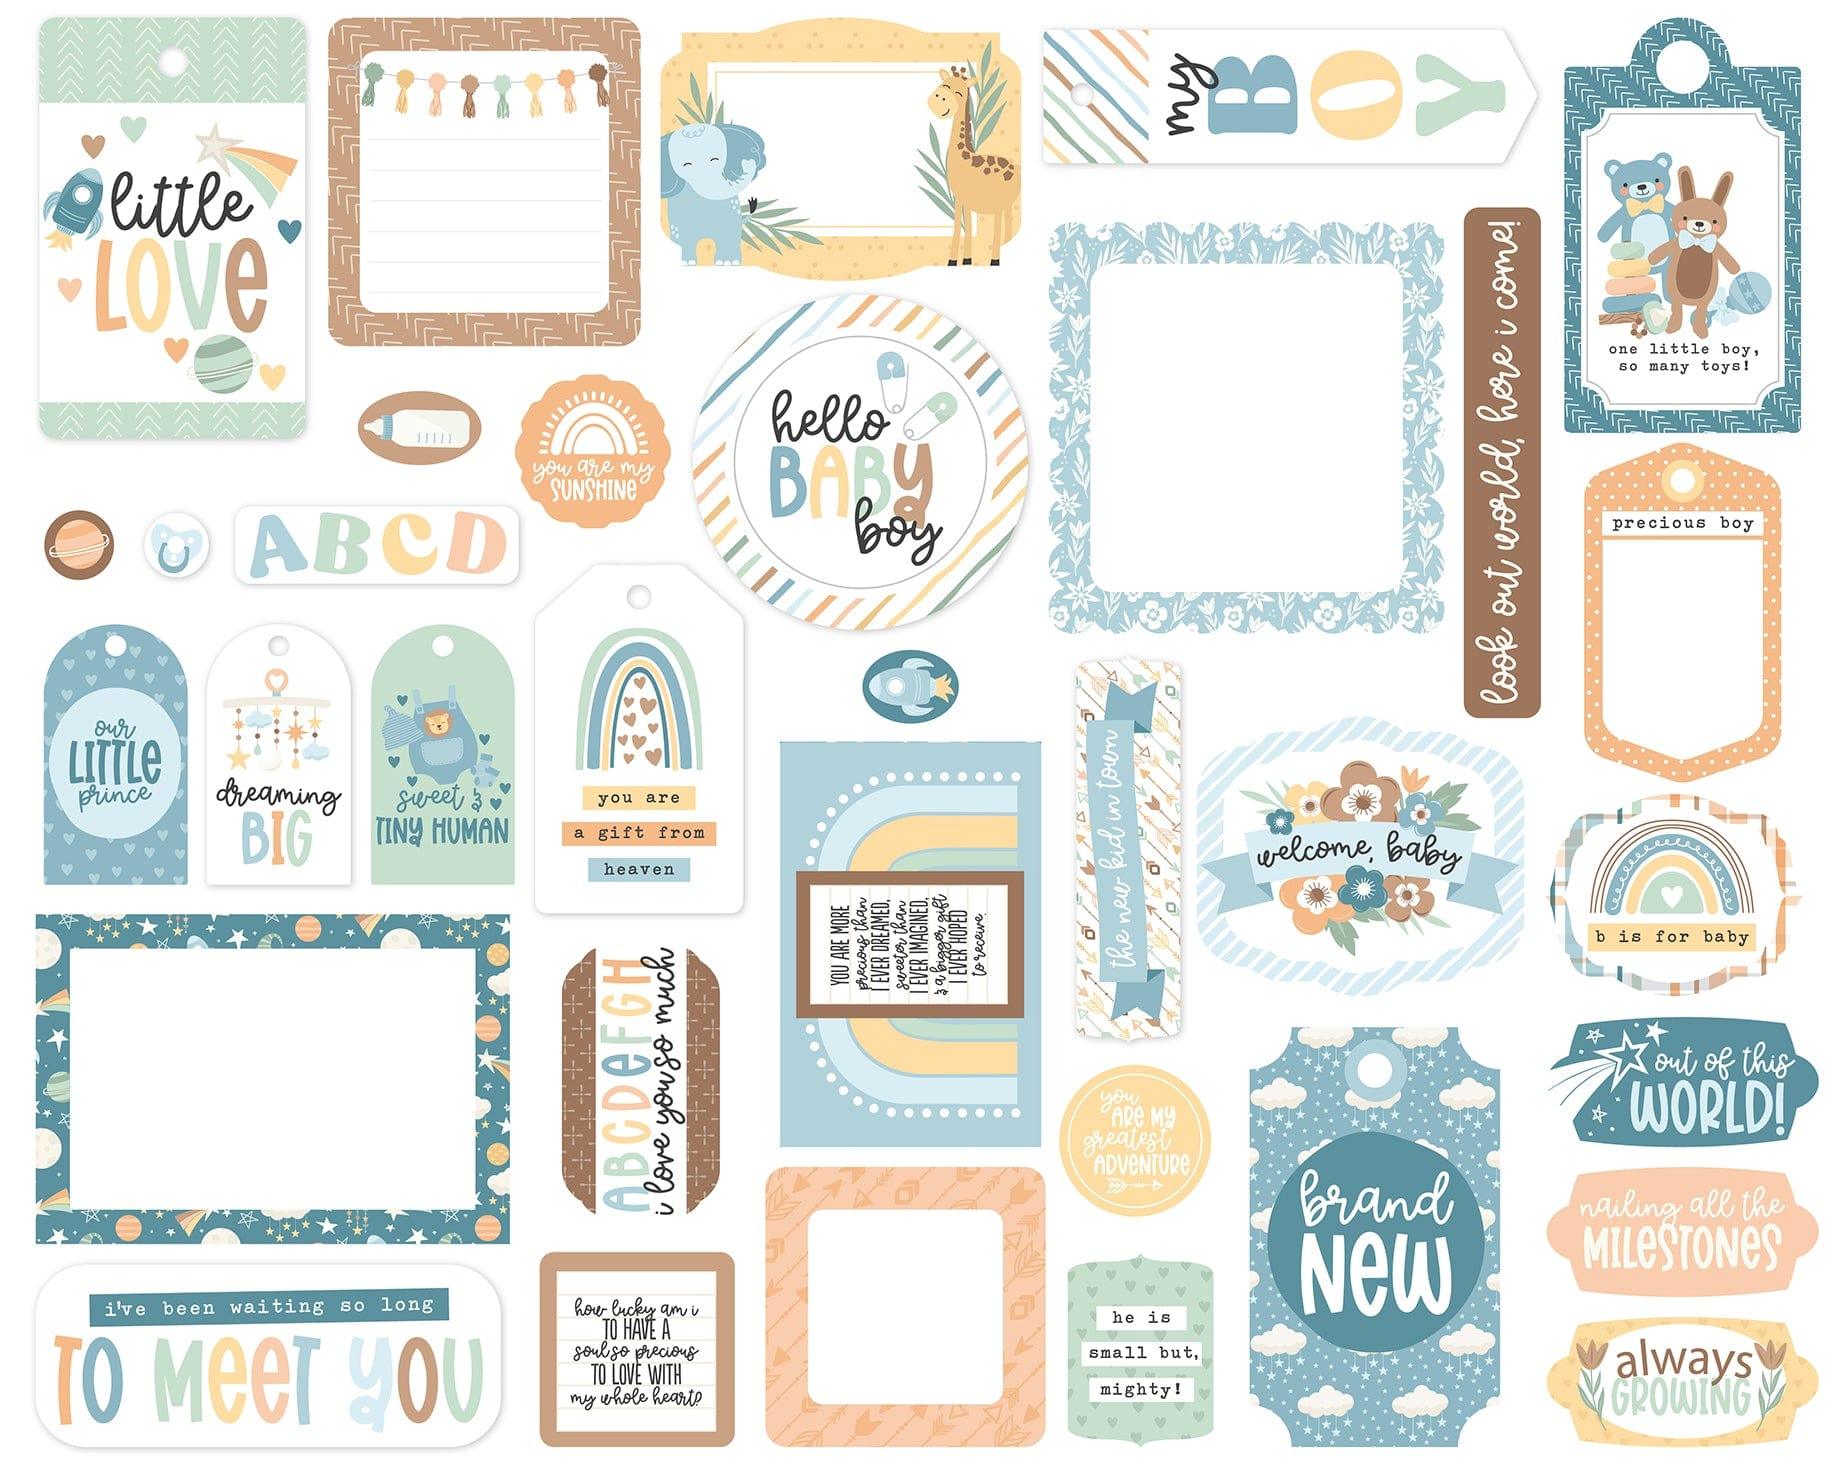 Our Baby Boy Collection 5 x 5 Scrapbook Tags & Frames Die Cuts by Echo Park Paper - Scrapbook Supply Companies